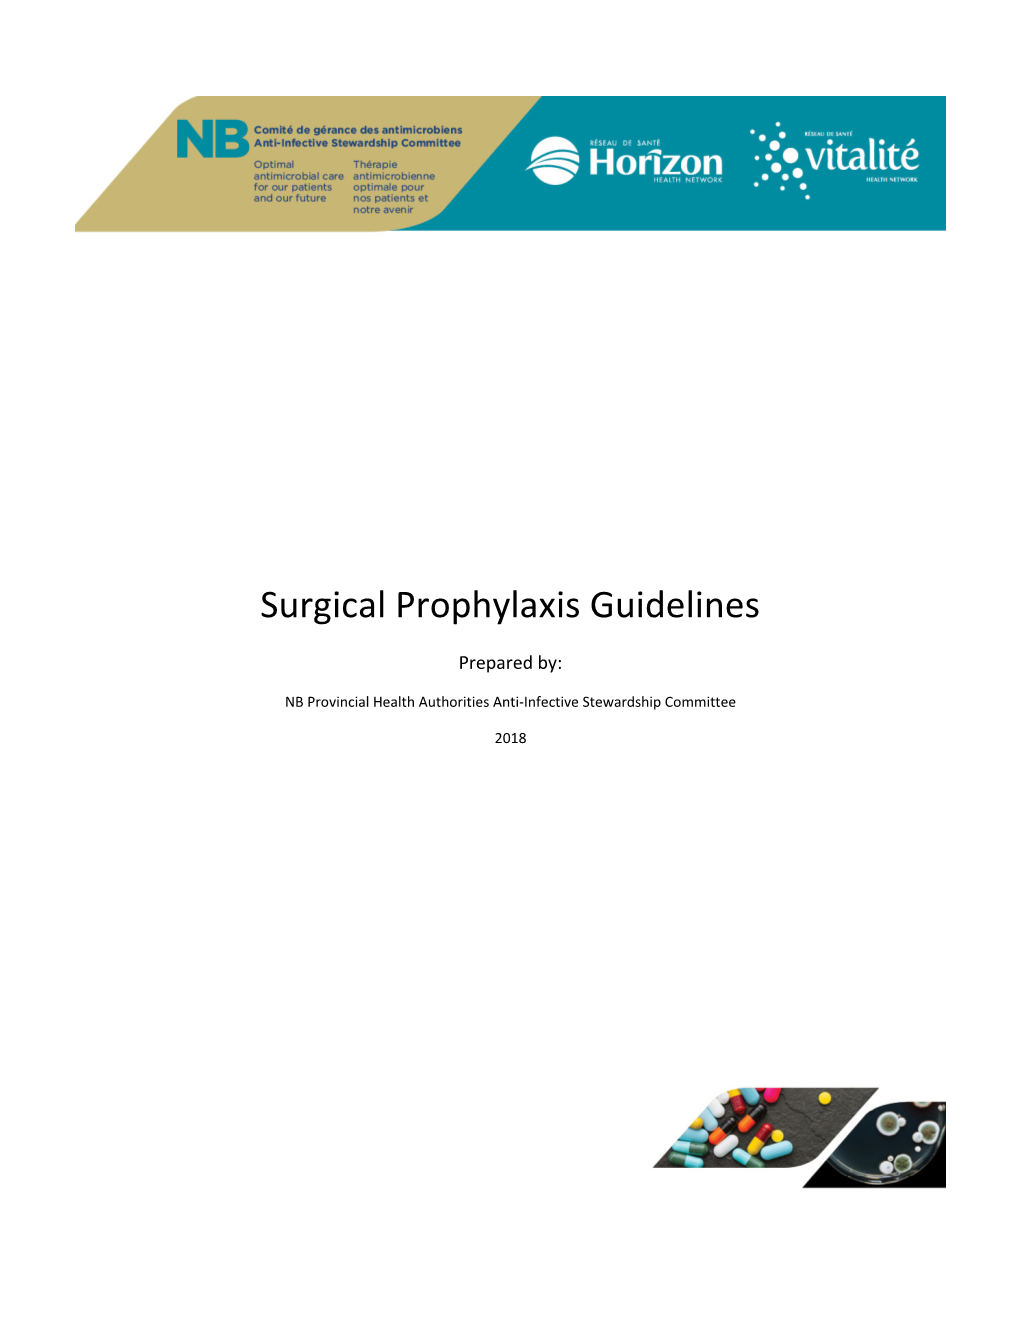 Surgical Prophylaxis Guidelines